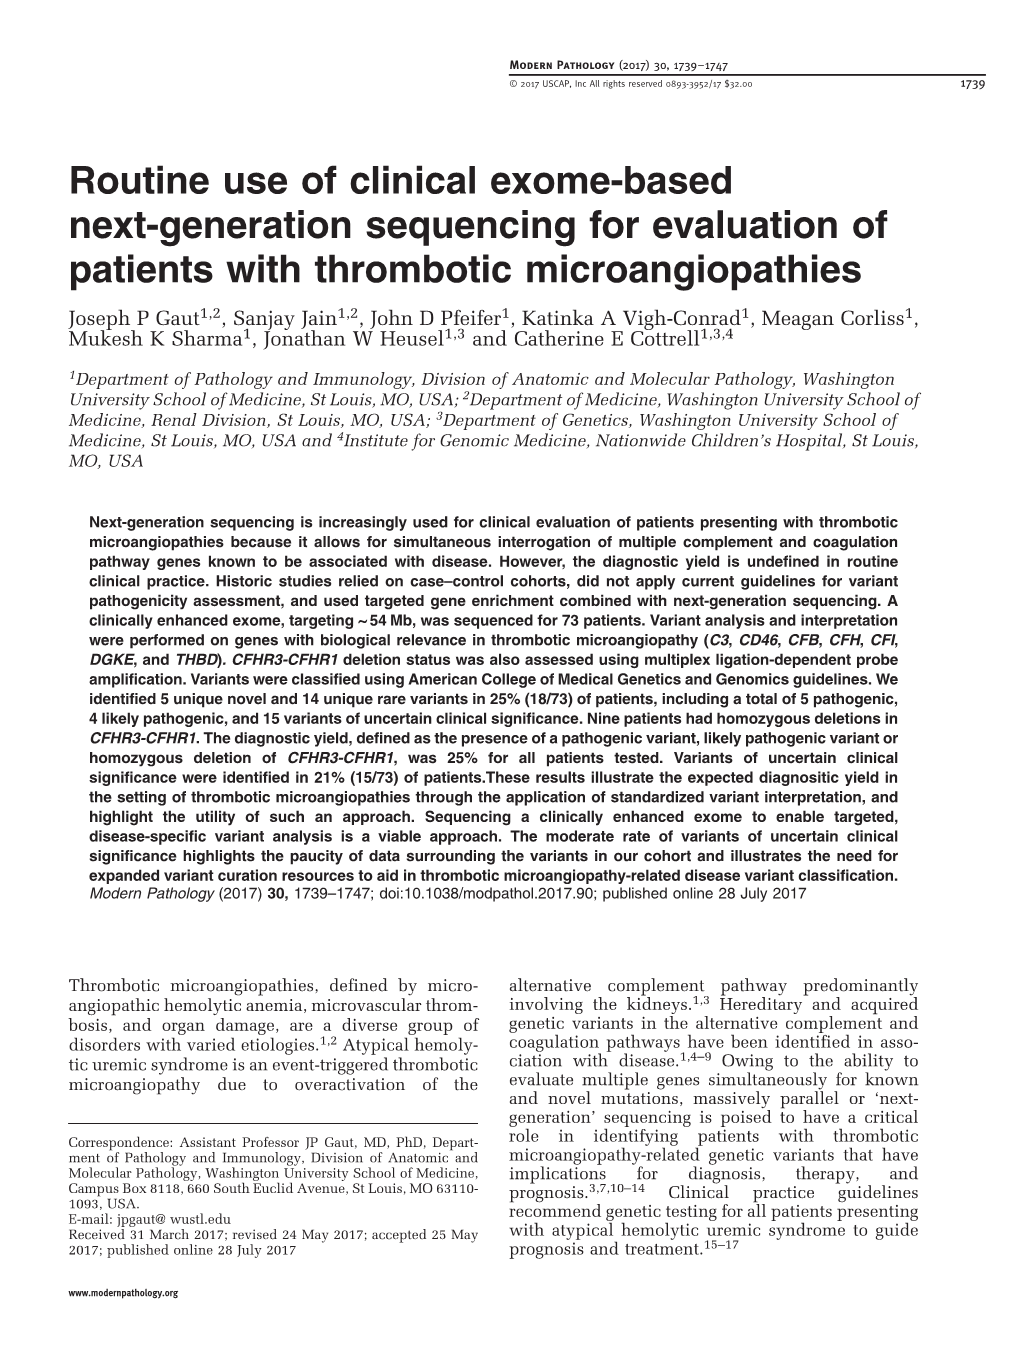 Routine Use of Clinical Exome-Based Next-Generation Sequencing for Evaluation of Patients with Thrombotic Microangiopathies